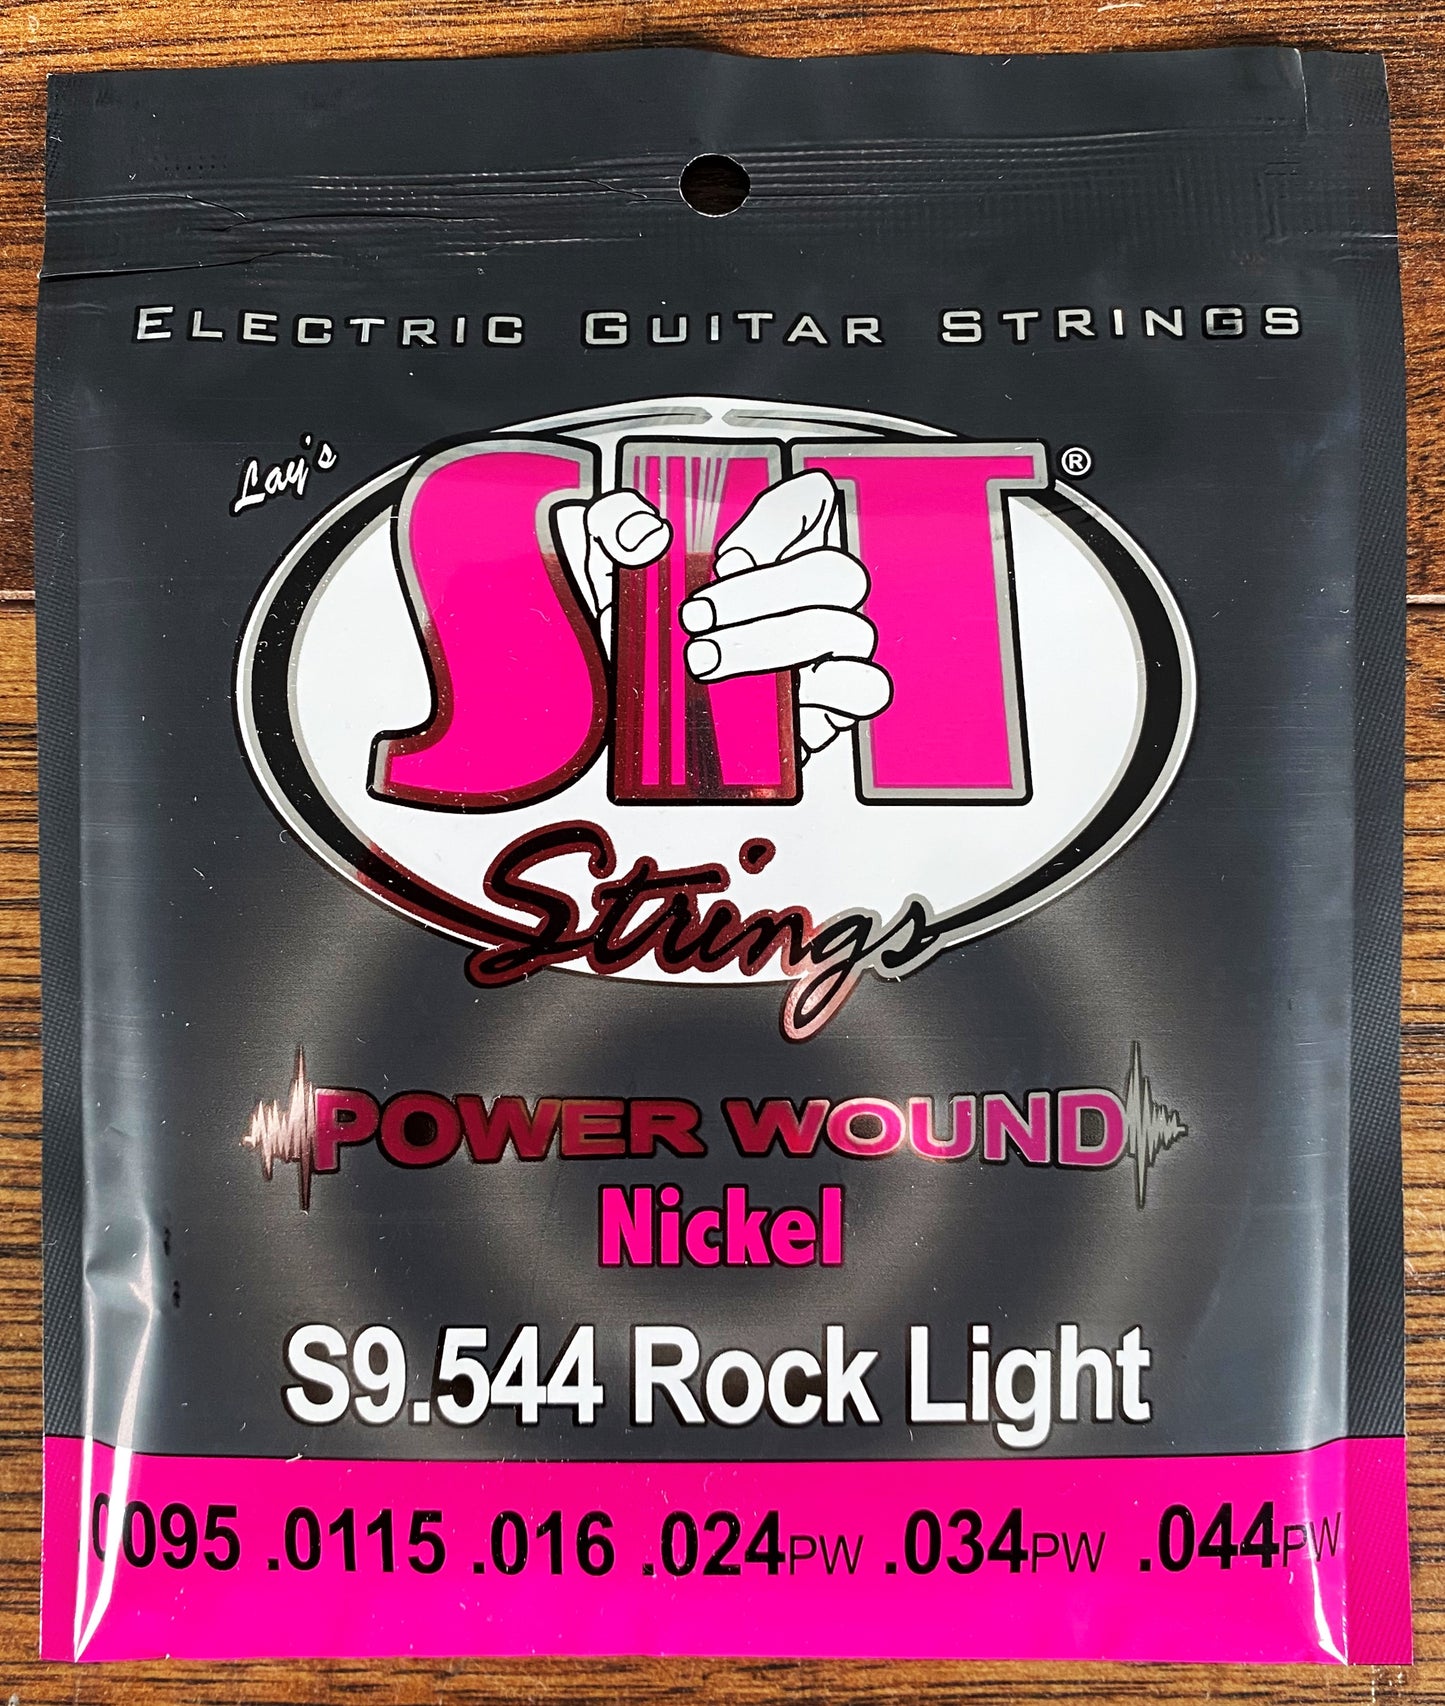 SIT Strings S9544 Power Wound Nickle Rock Light Guitar String Set 3 Pack